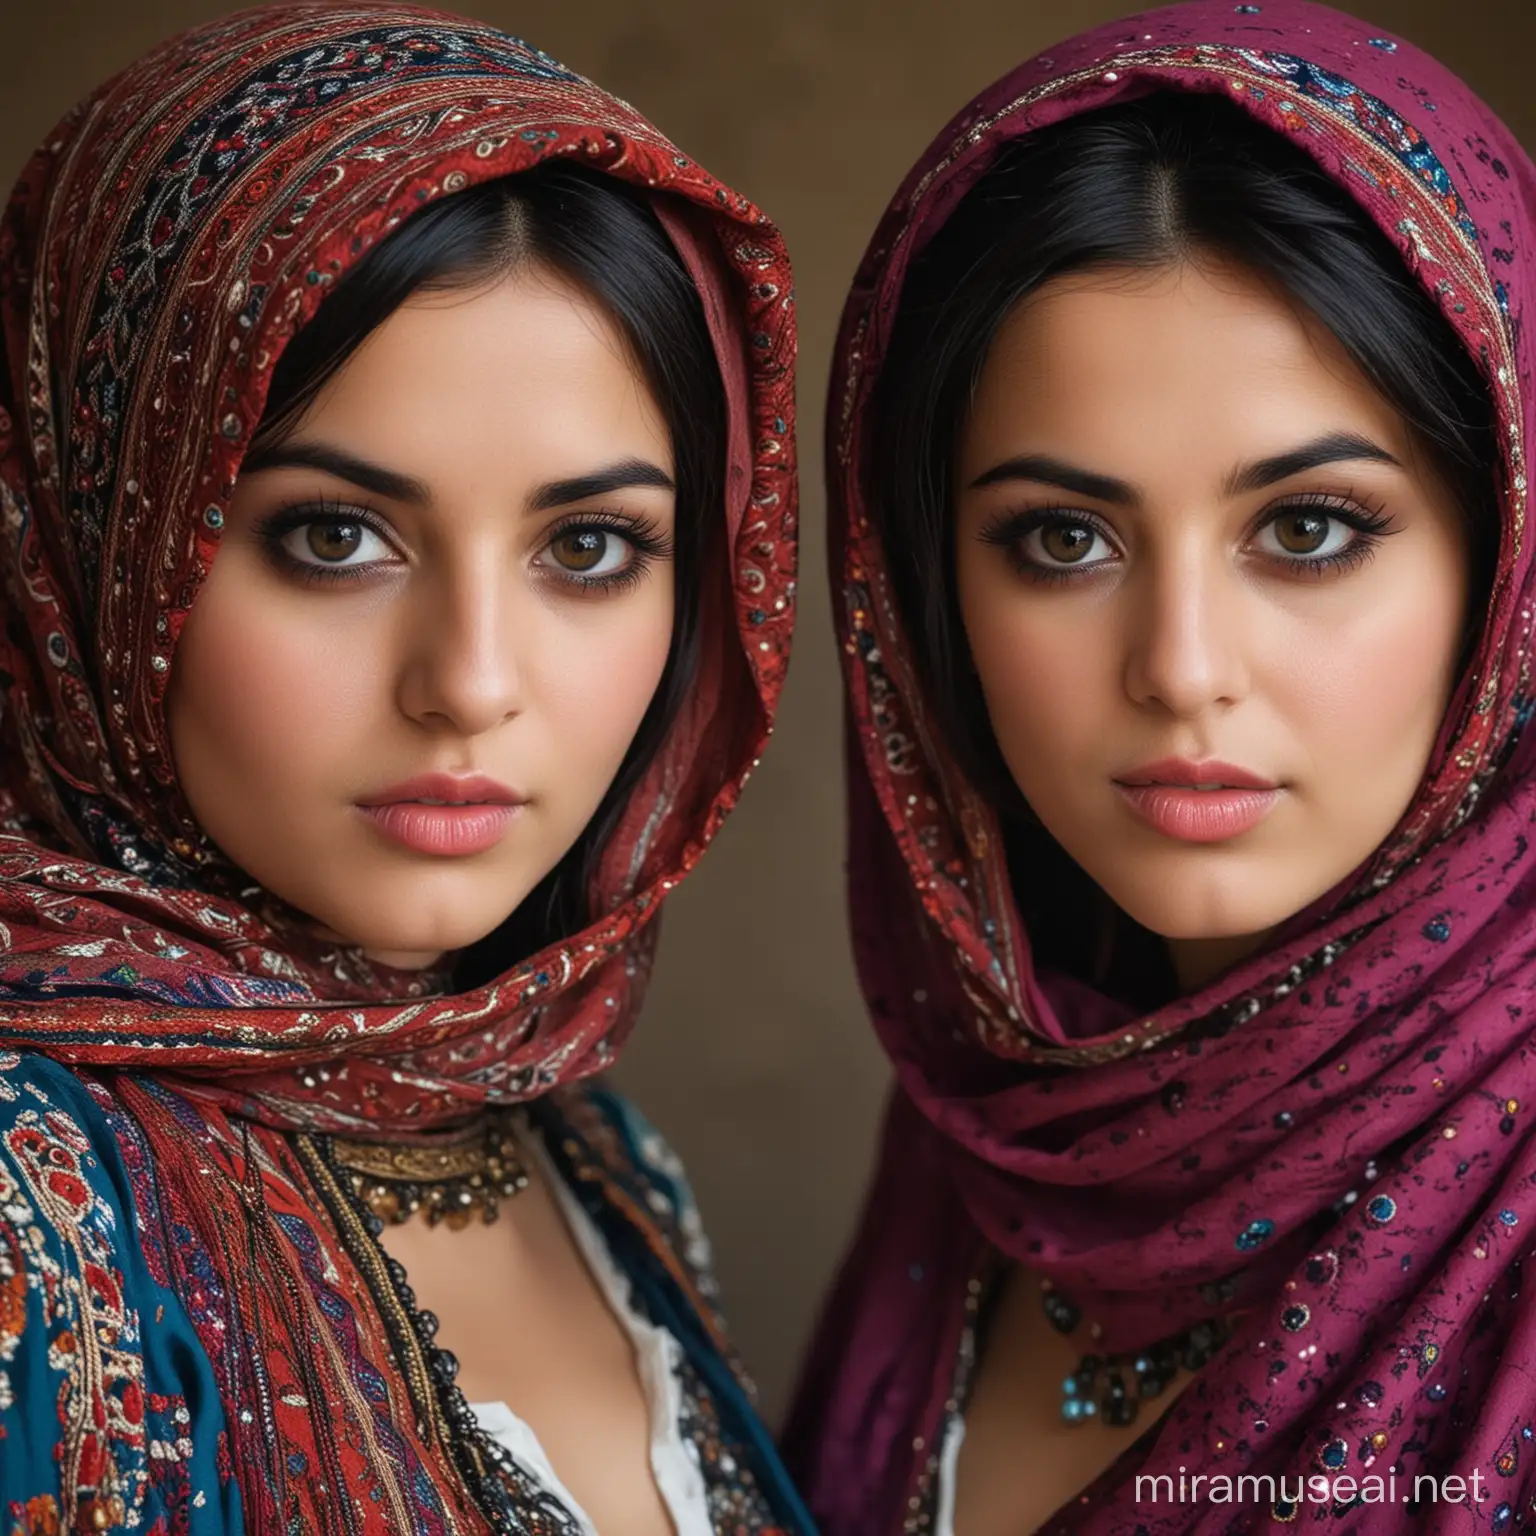 Captivating Afghan Girls in Traditional Costumes with Enchanting Features